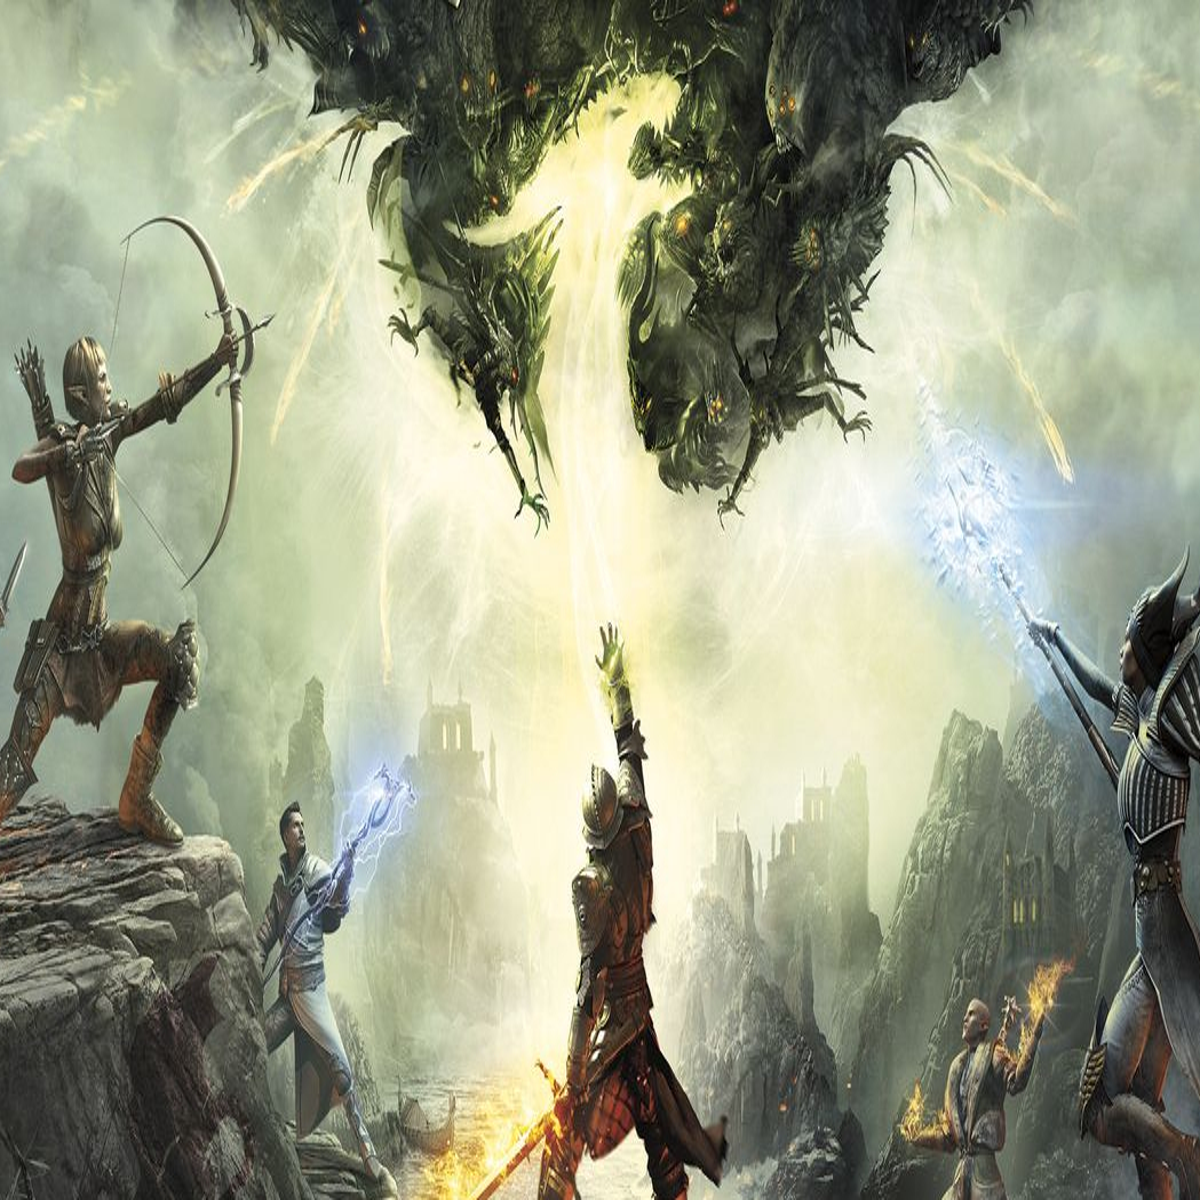 Dragon Age: Dreadwolf Reportedly Bringing Back Popular Inquisition Feature